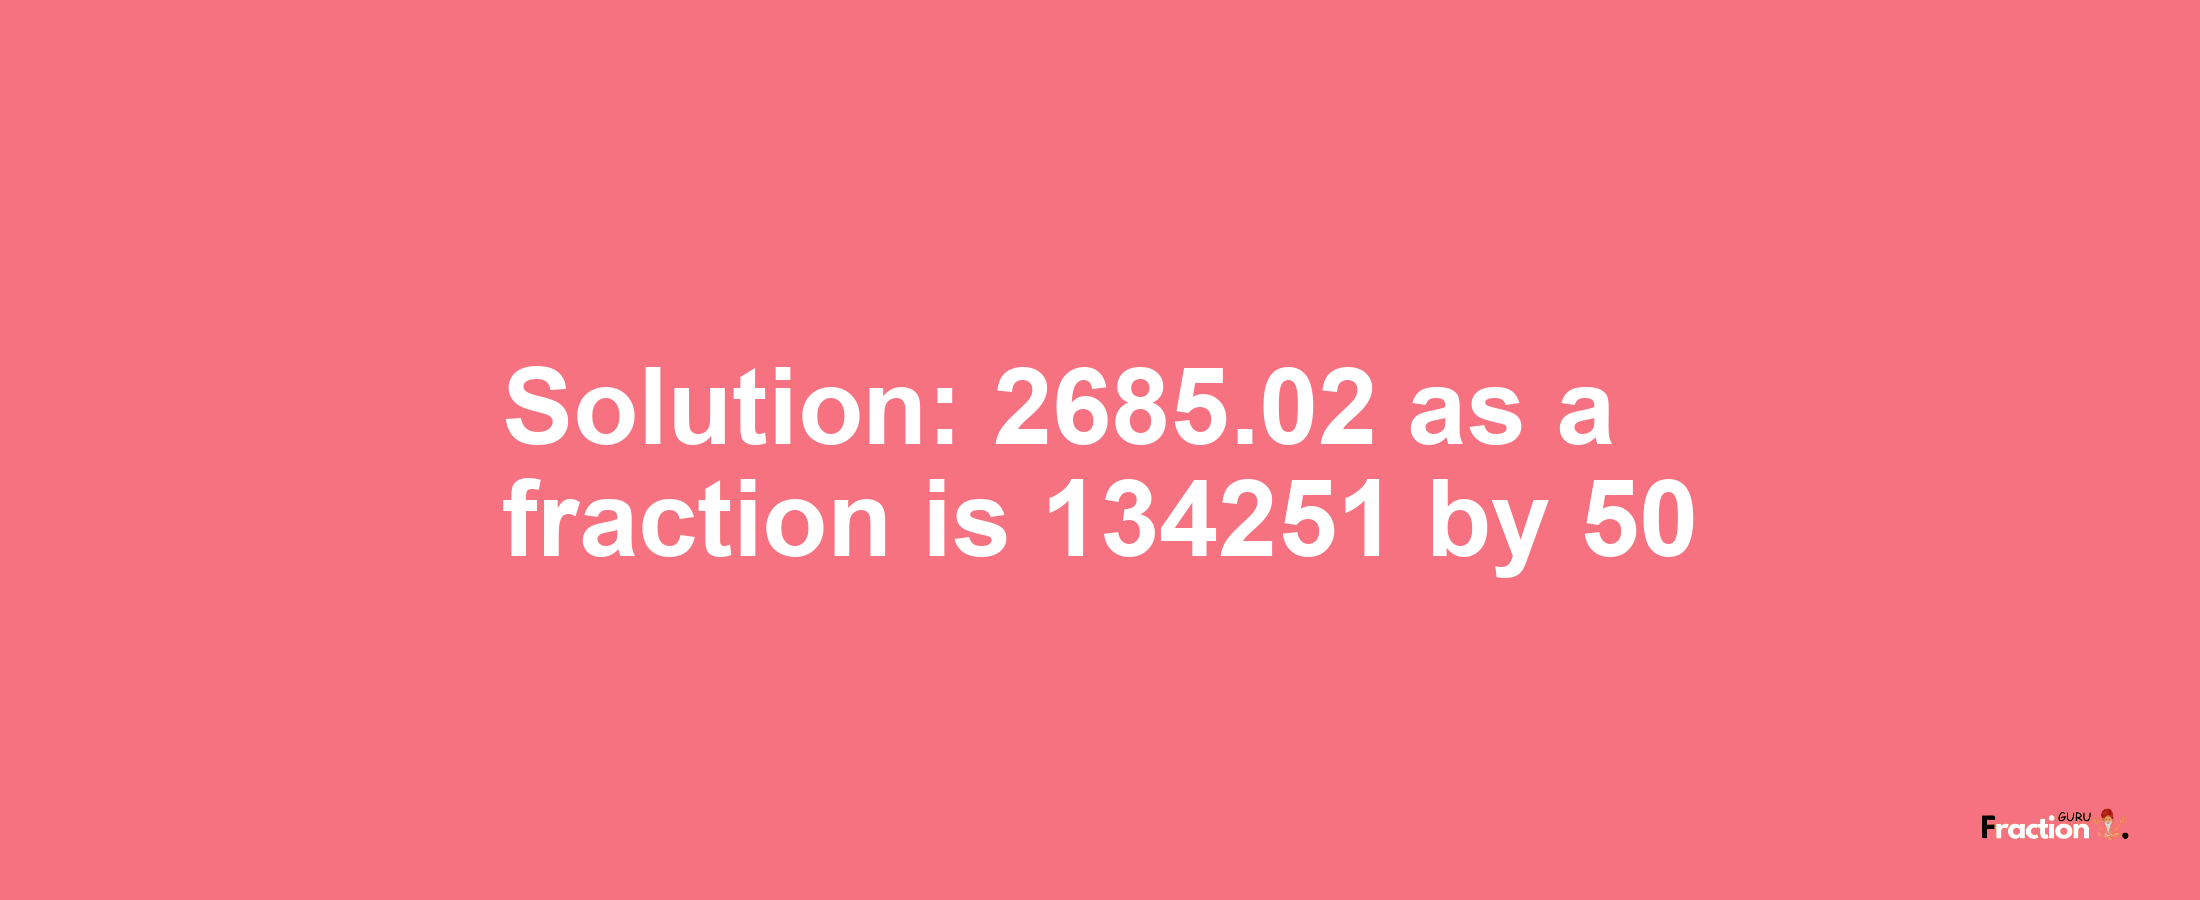 Solution:2685.02 as a fraction is 134251/50